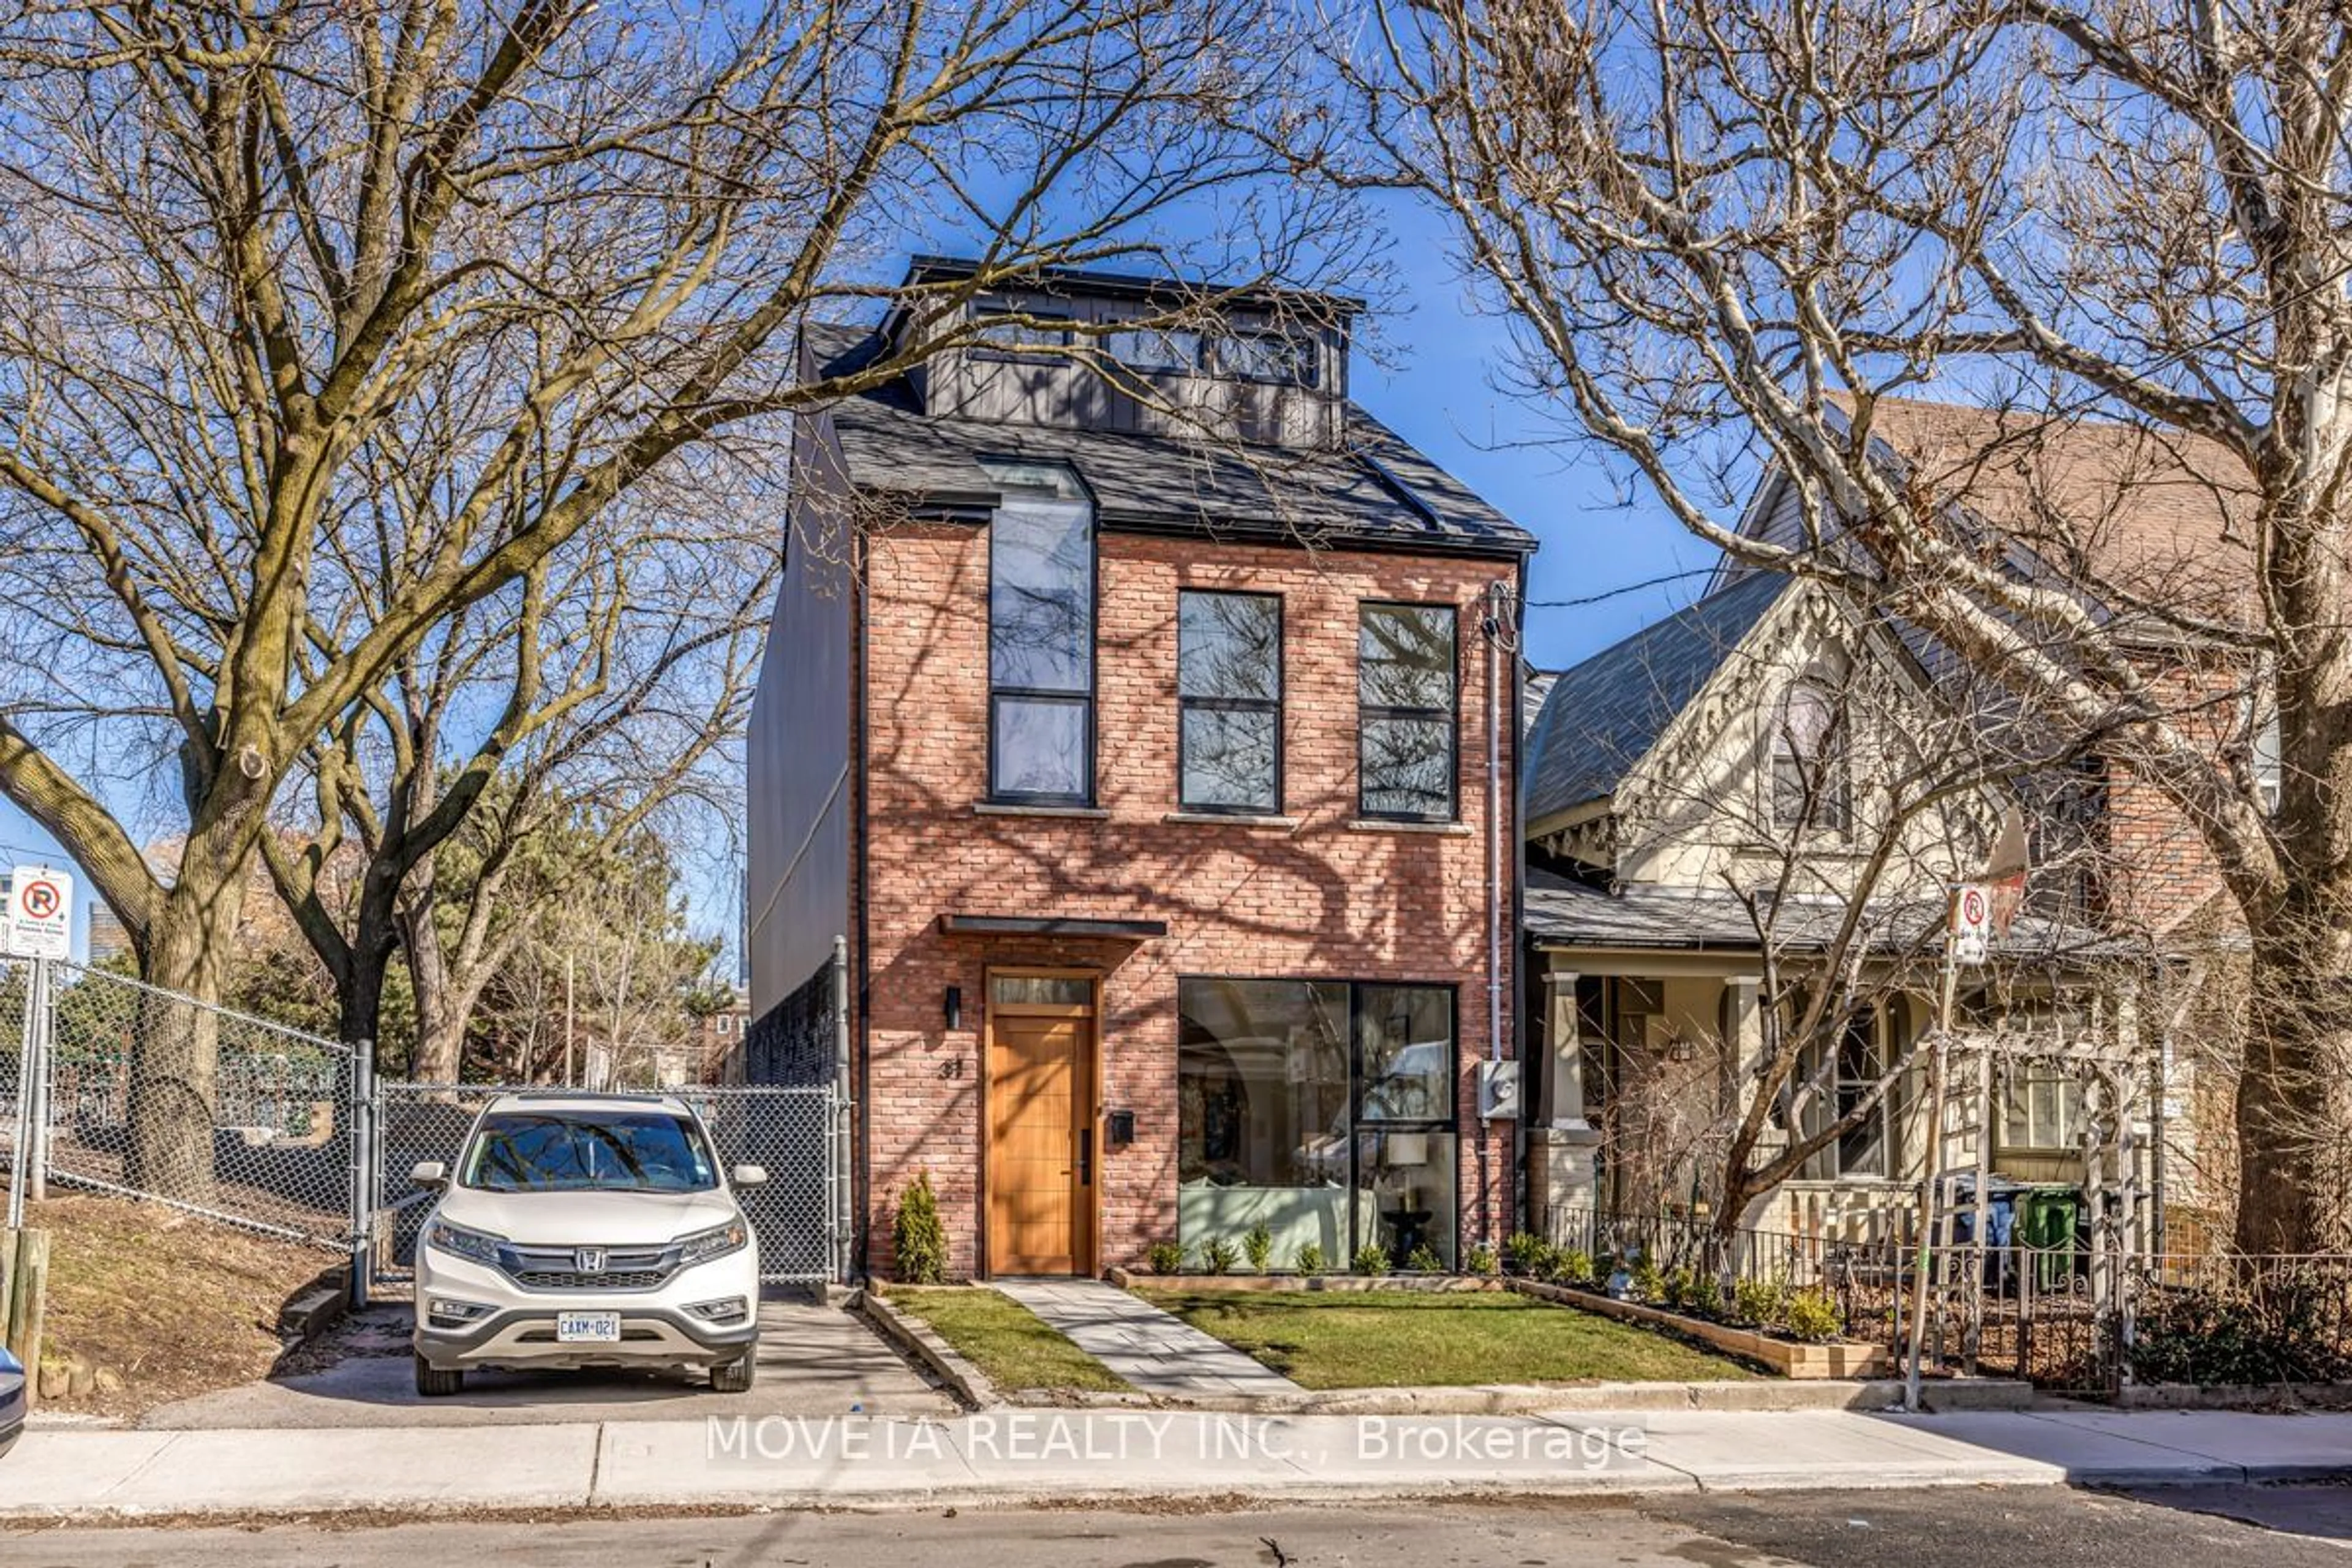 Home with brick exterior material for 31 Lippincott St, Toronto Ontario M5T 2R6